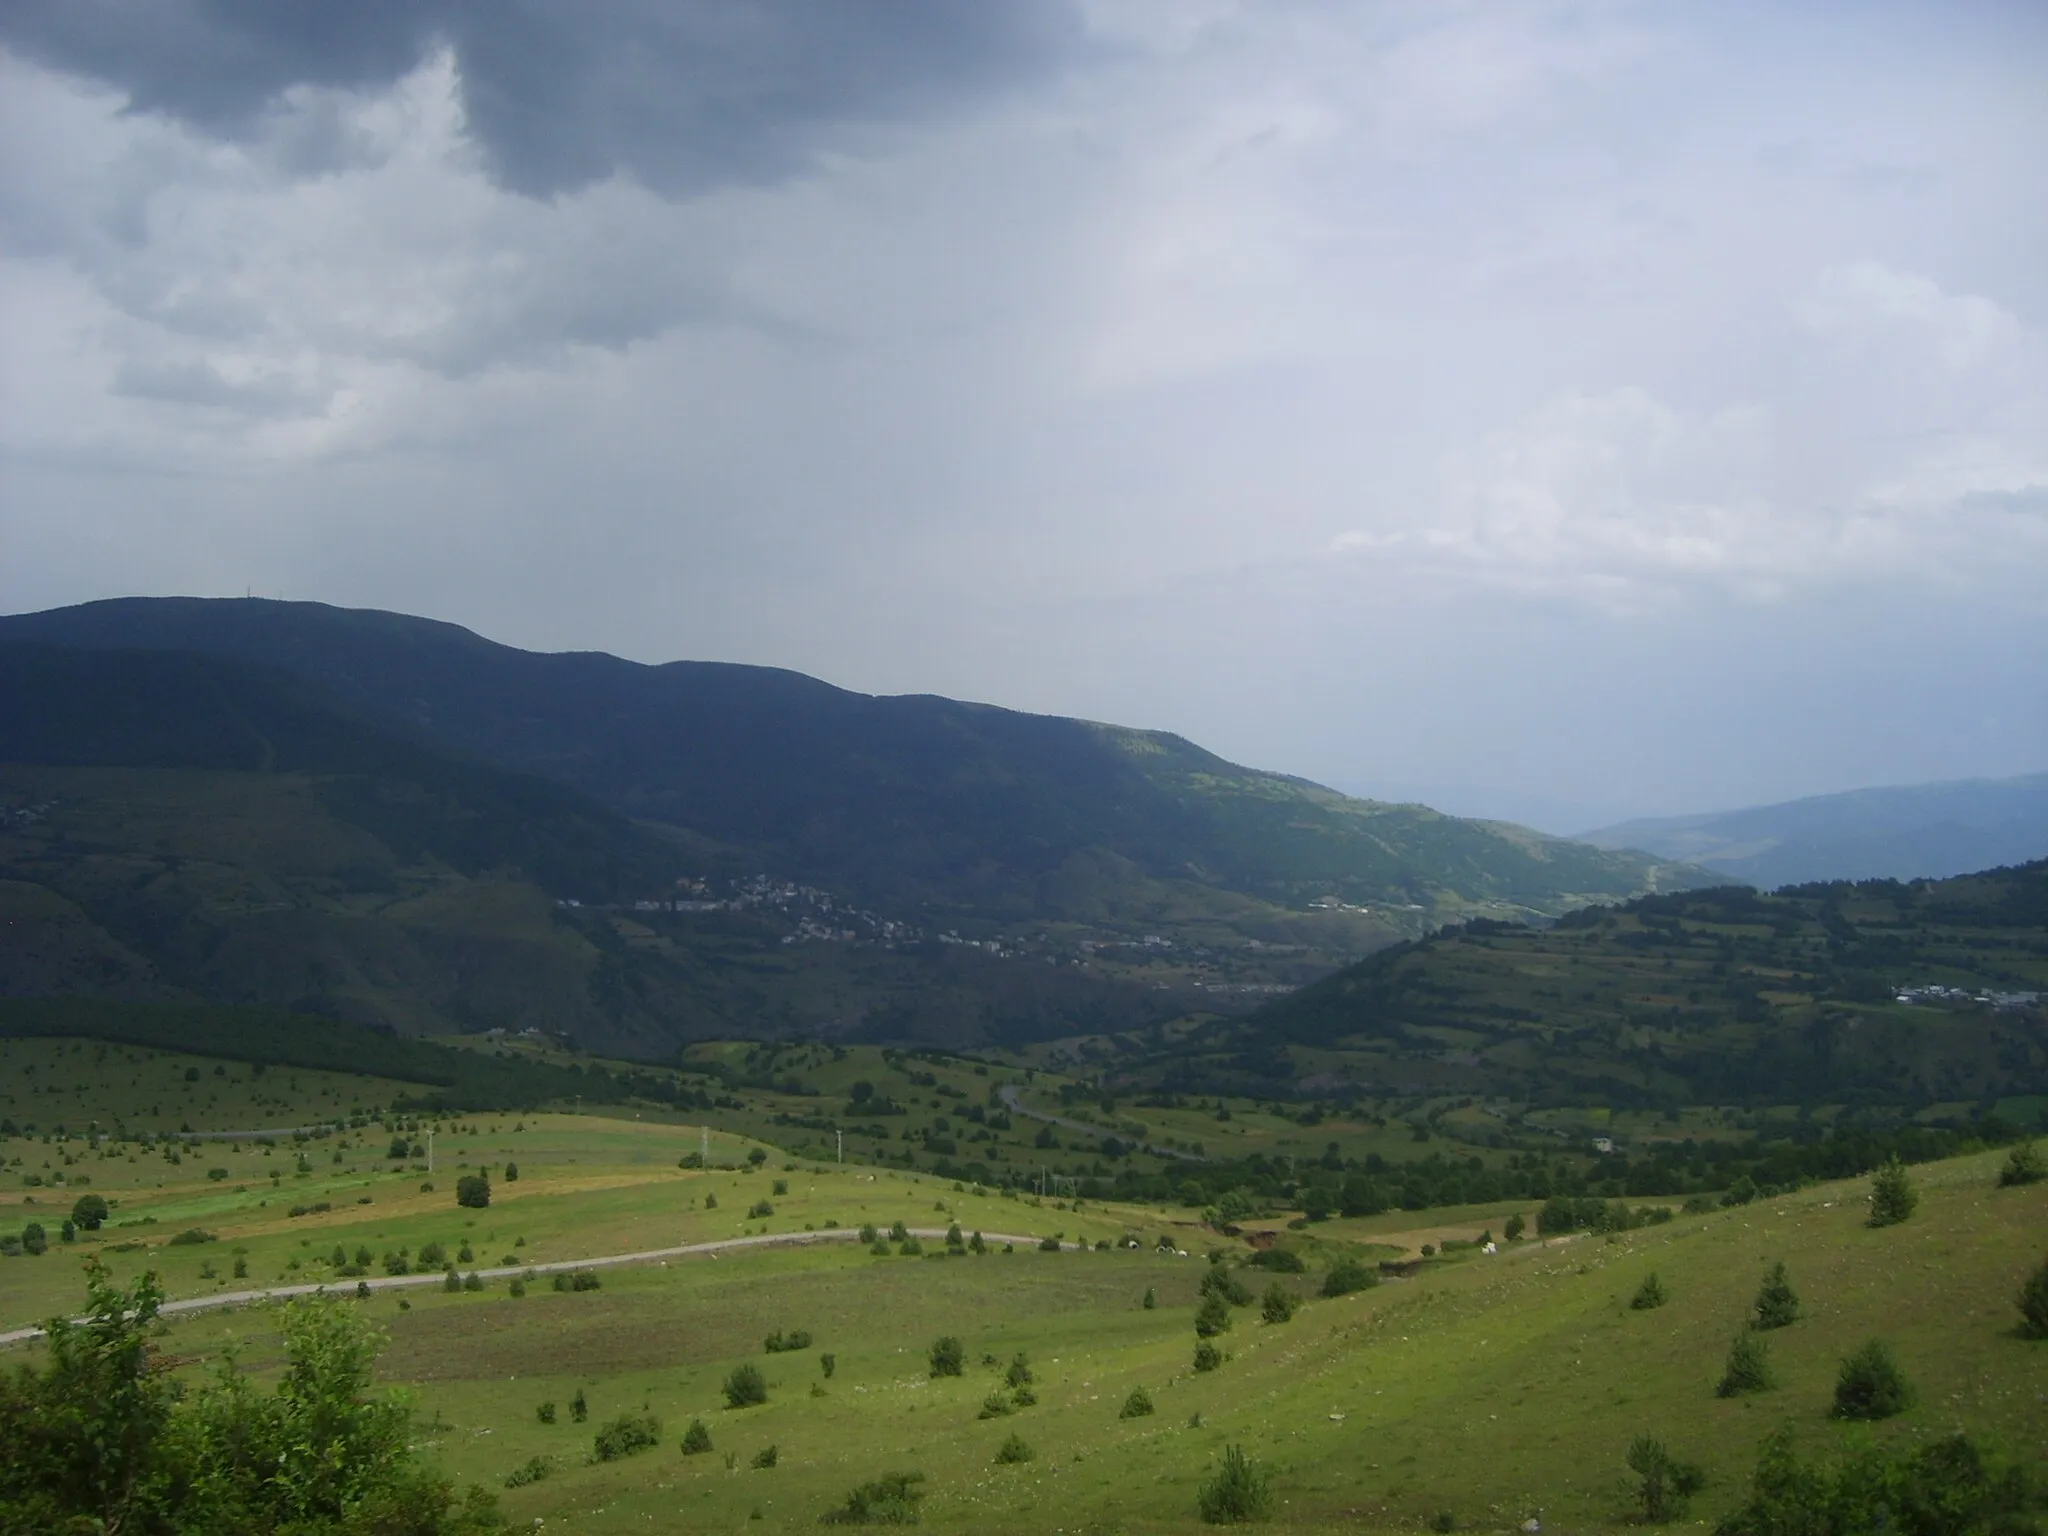 Photo showing: Landscape in Posof province of Turkey, with Posof village in the middle.